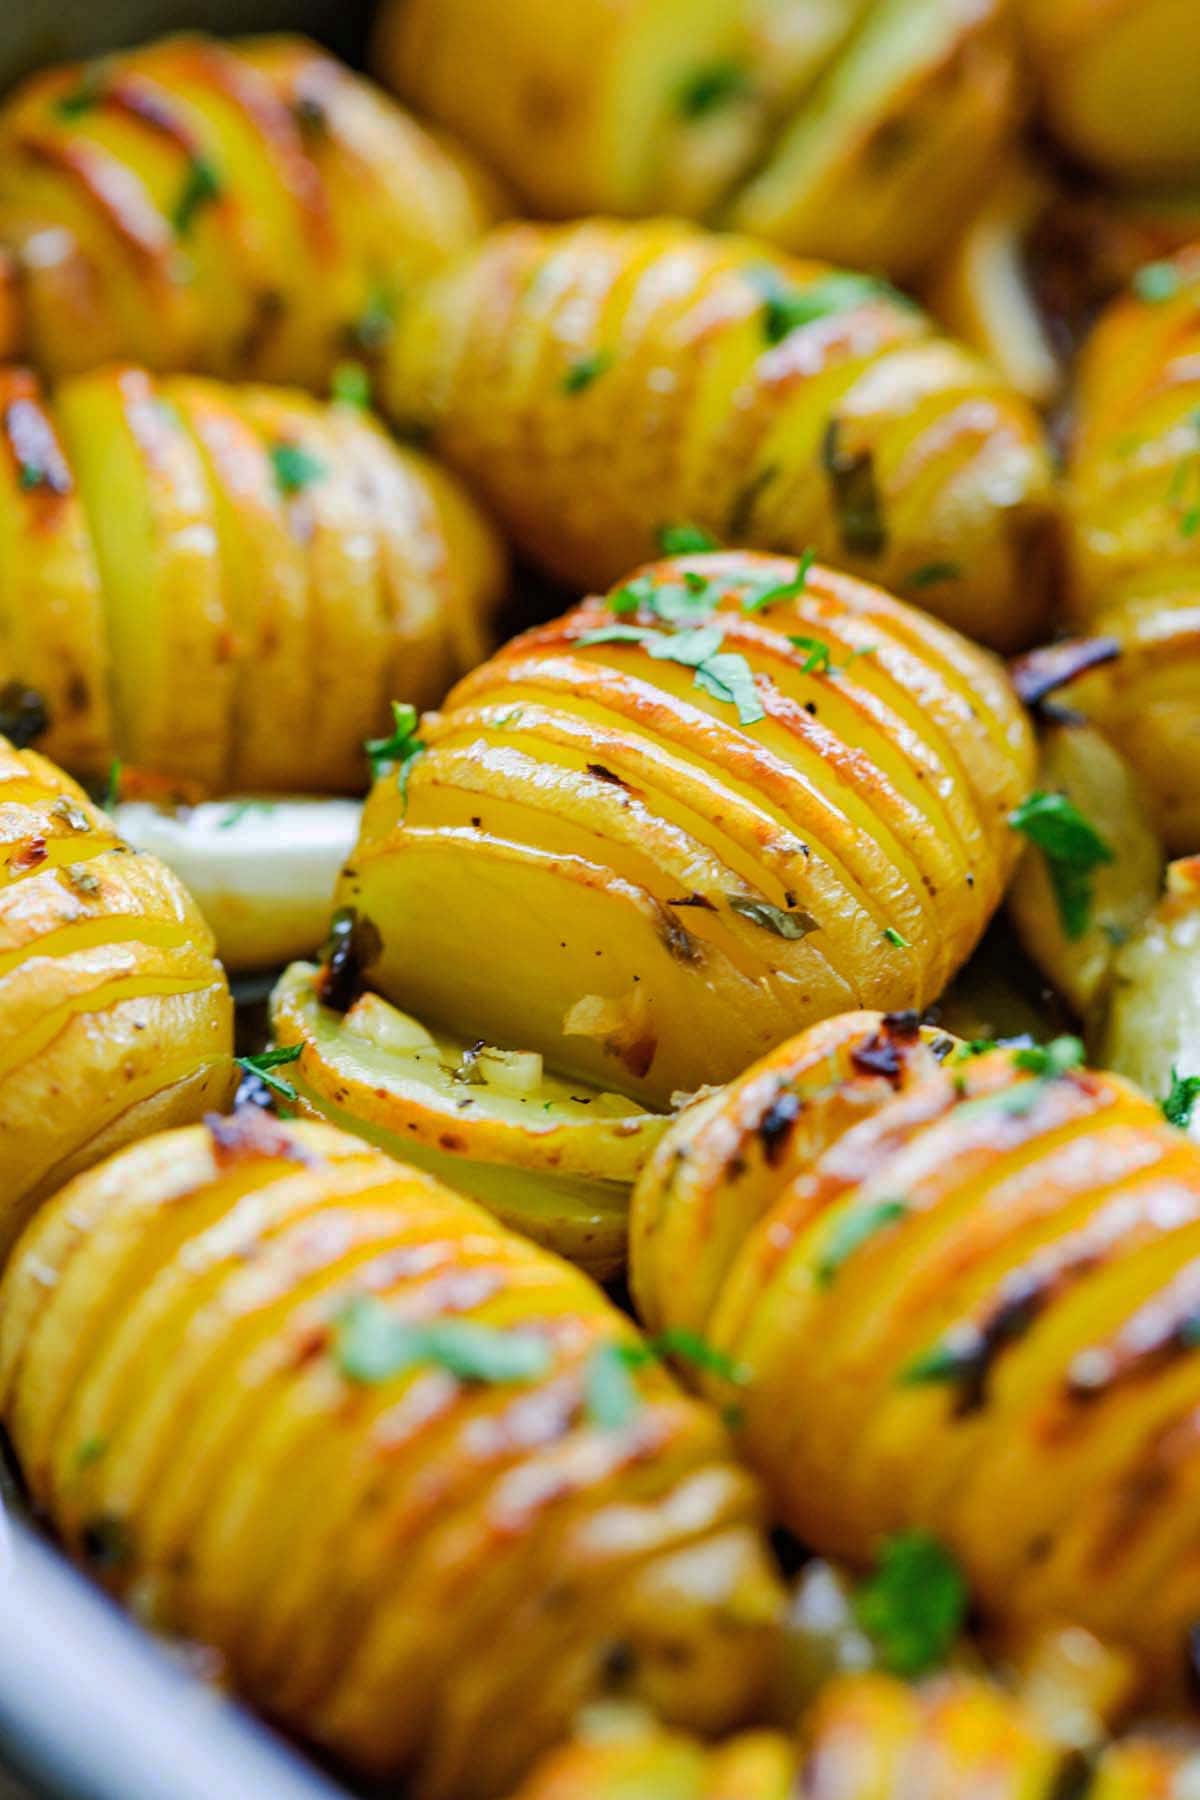 Close up shot of buttery and garlicky flavored roasted potatoes infused with flavorful herbs.